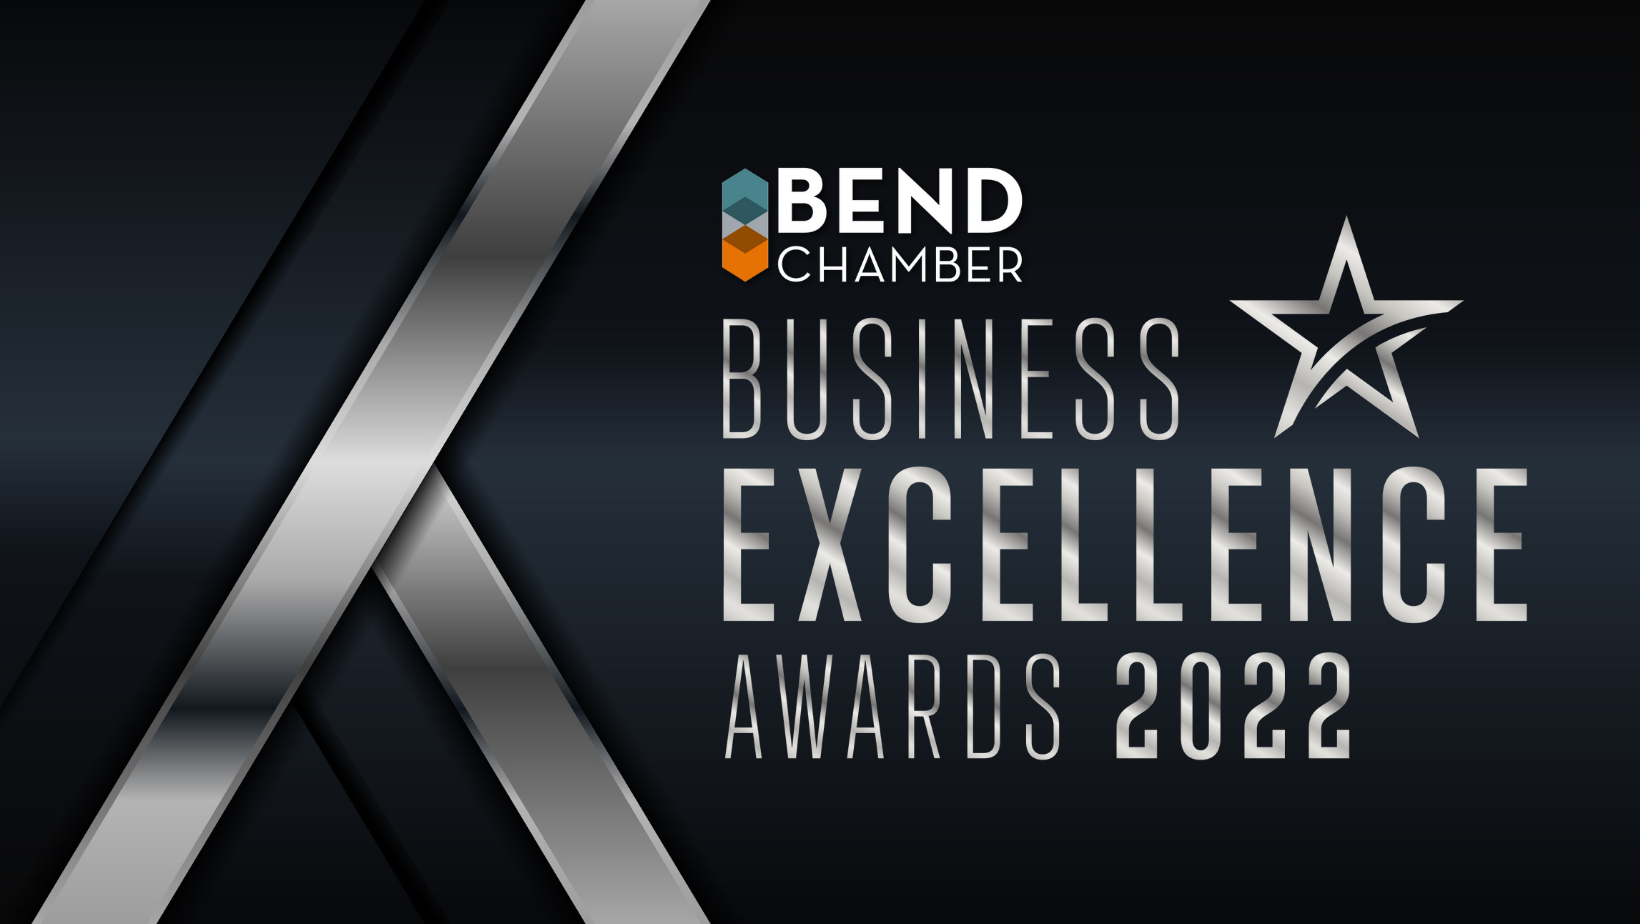 Bend Chamber Business Excellence Awards 2022